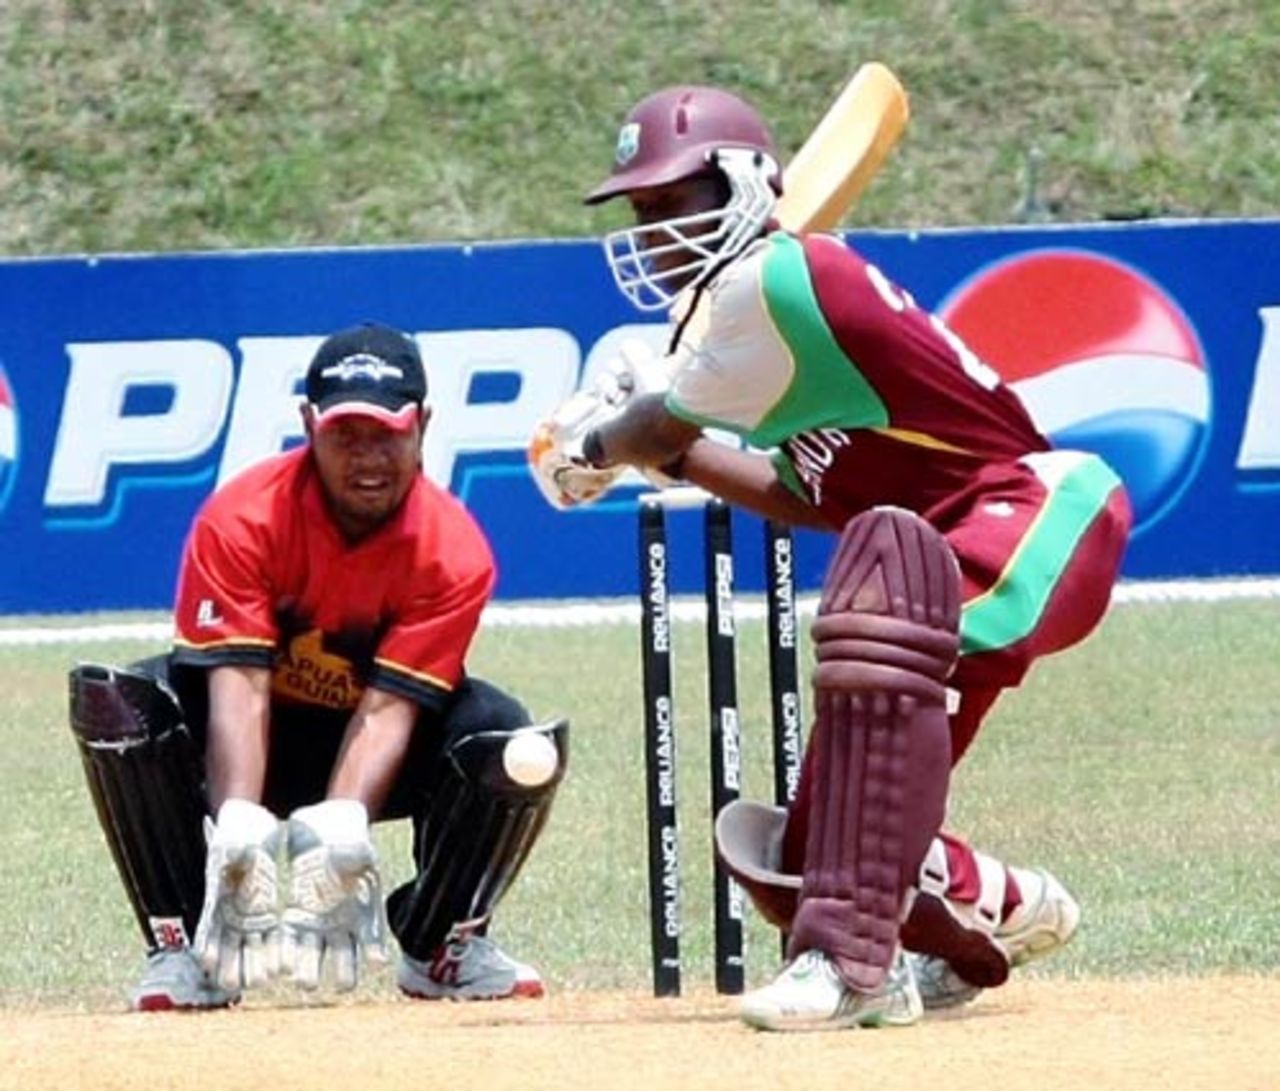 Horace Miller prepares to hammer the ball, Papua New Guinea U-19s v West Indies U-19s, Under-19 World Cup, Johor, February 27, 2008